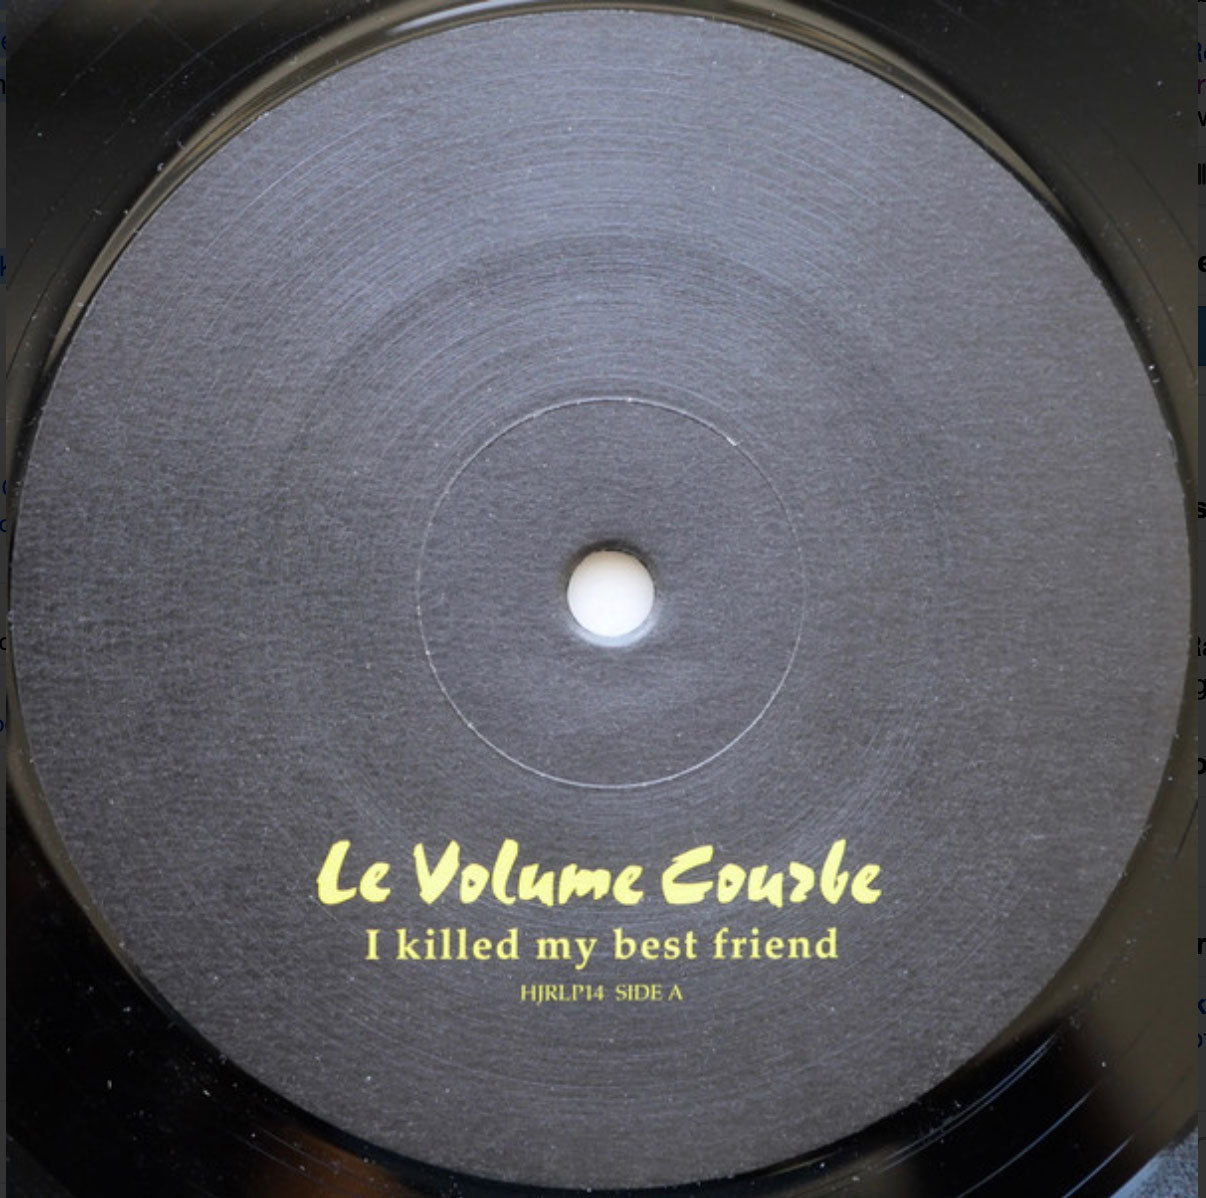 Le Volume Courbe - I Killed My Best Friend - UK Pressing - Rare